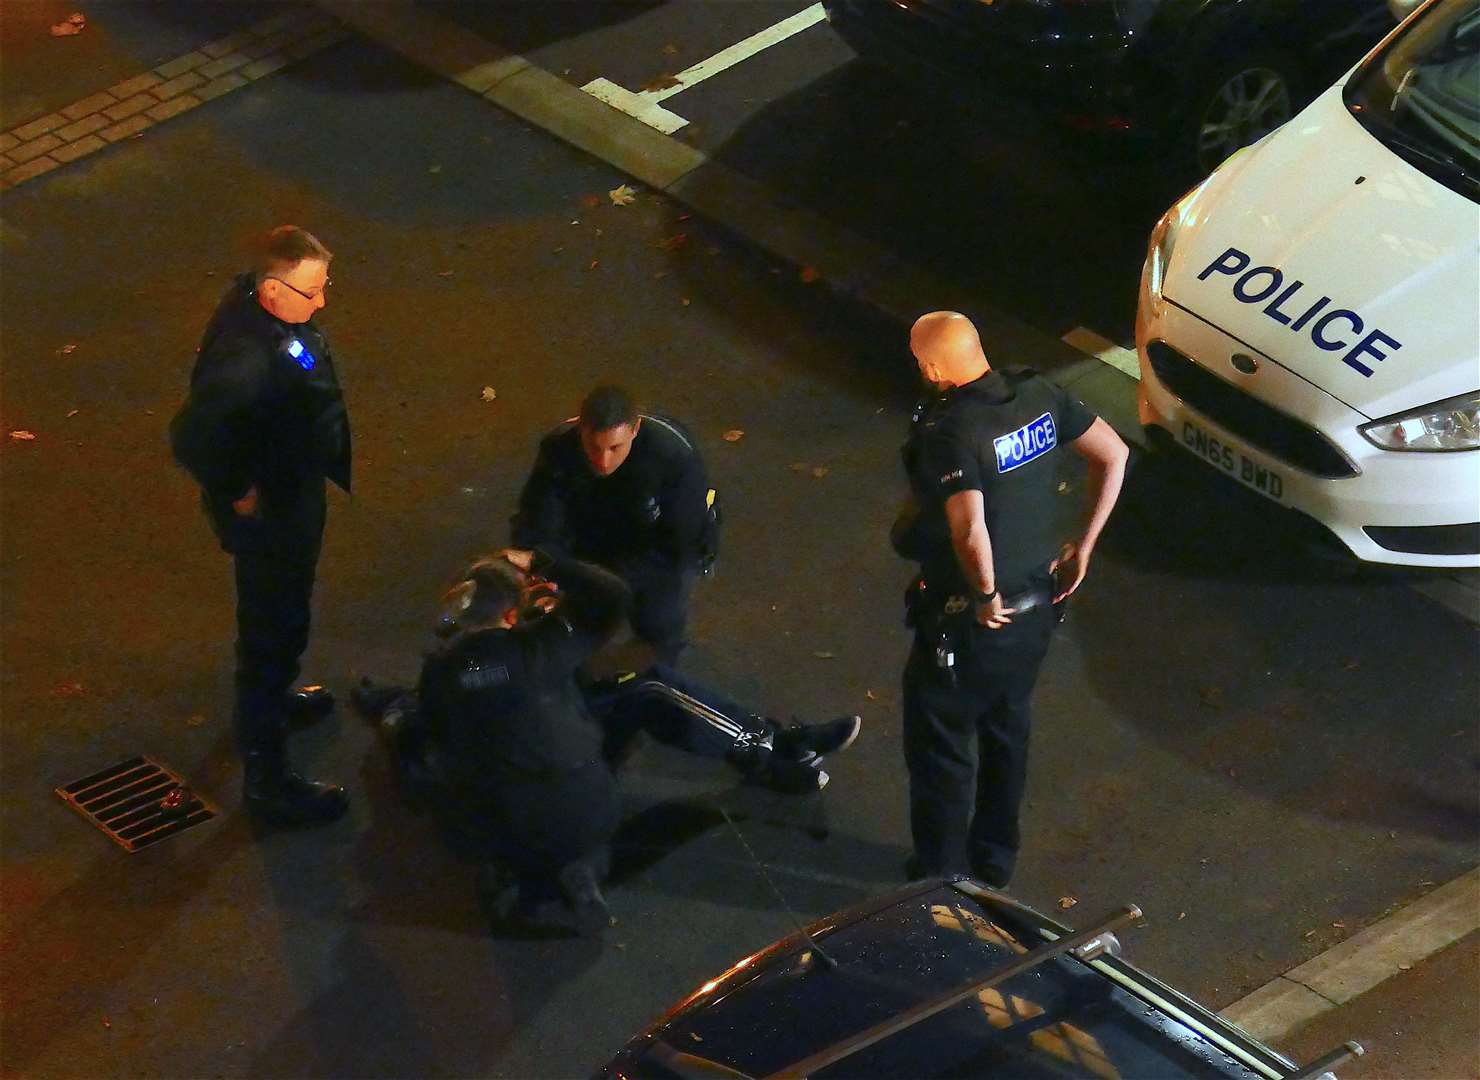 Police officers had to subdue the man at the Regents Court flats in West Street, Gravesend. (5327053)